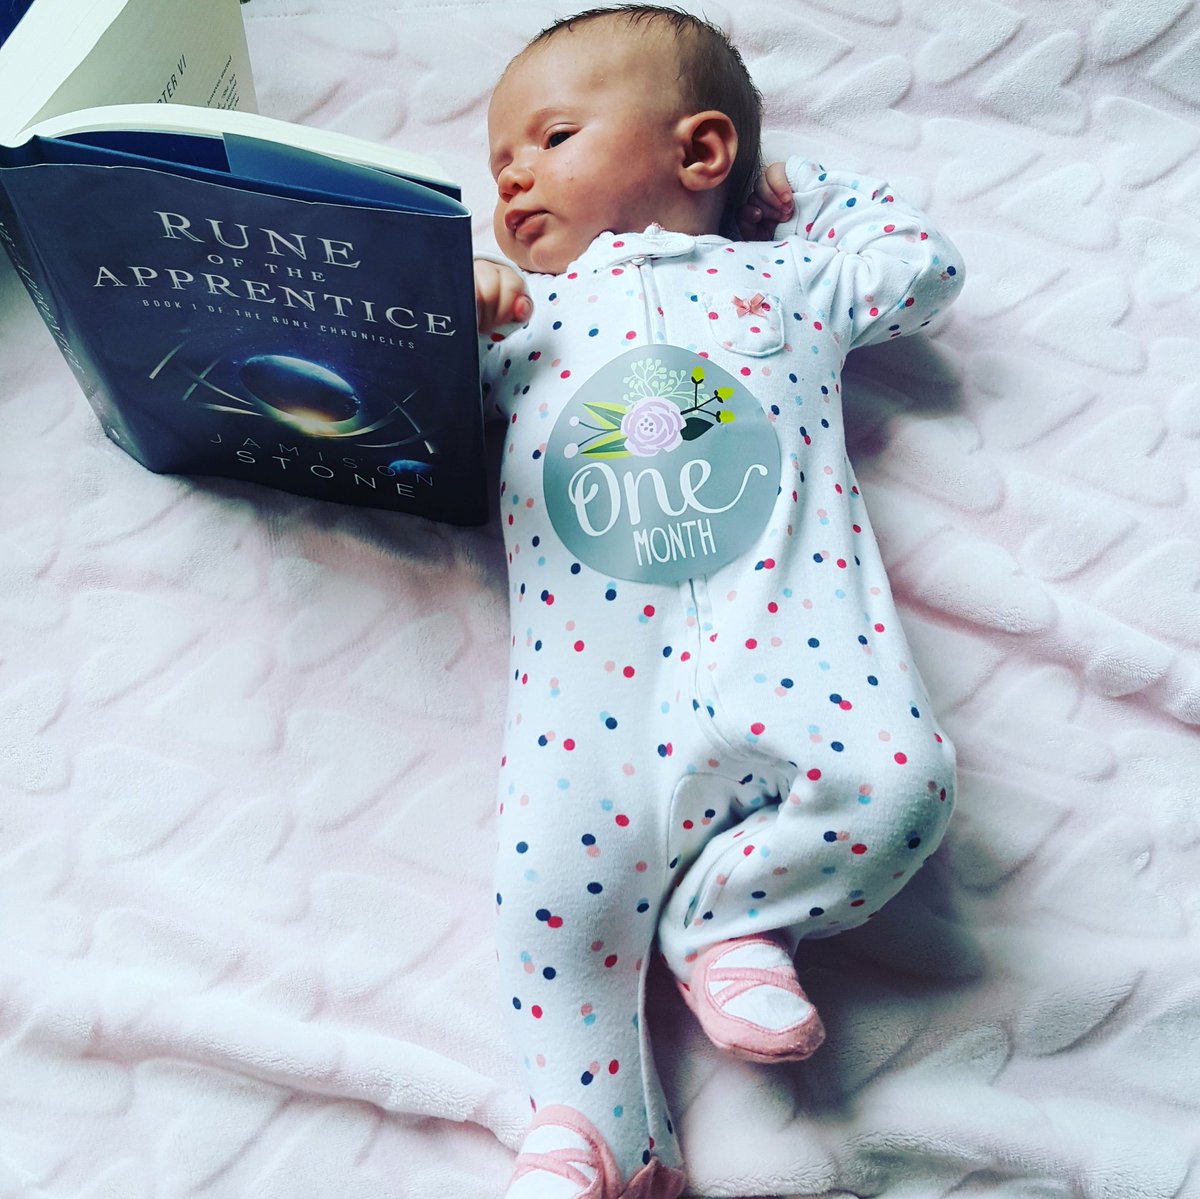 Only #1monthold and baby Freya is already deeply engrossed in her copy of #RuneOfTheApprentice by @Inkshares  🌌📚 #ReadEarlyAndOften 😄